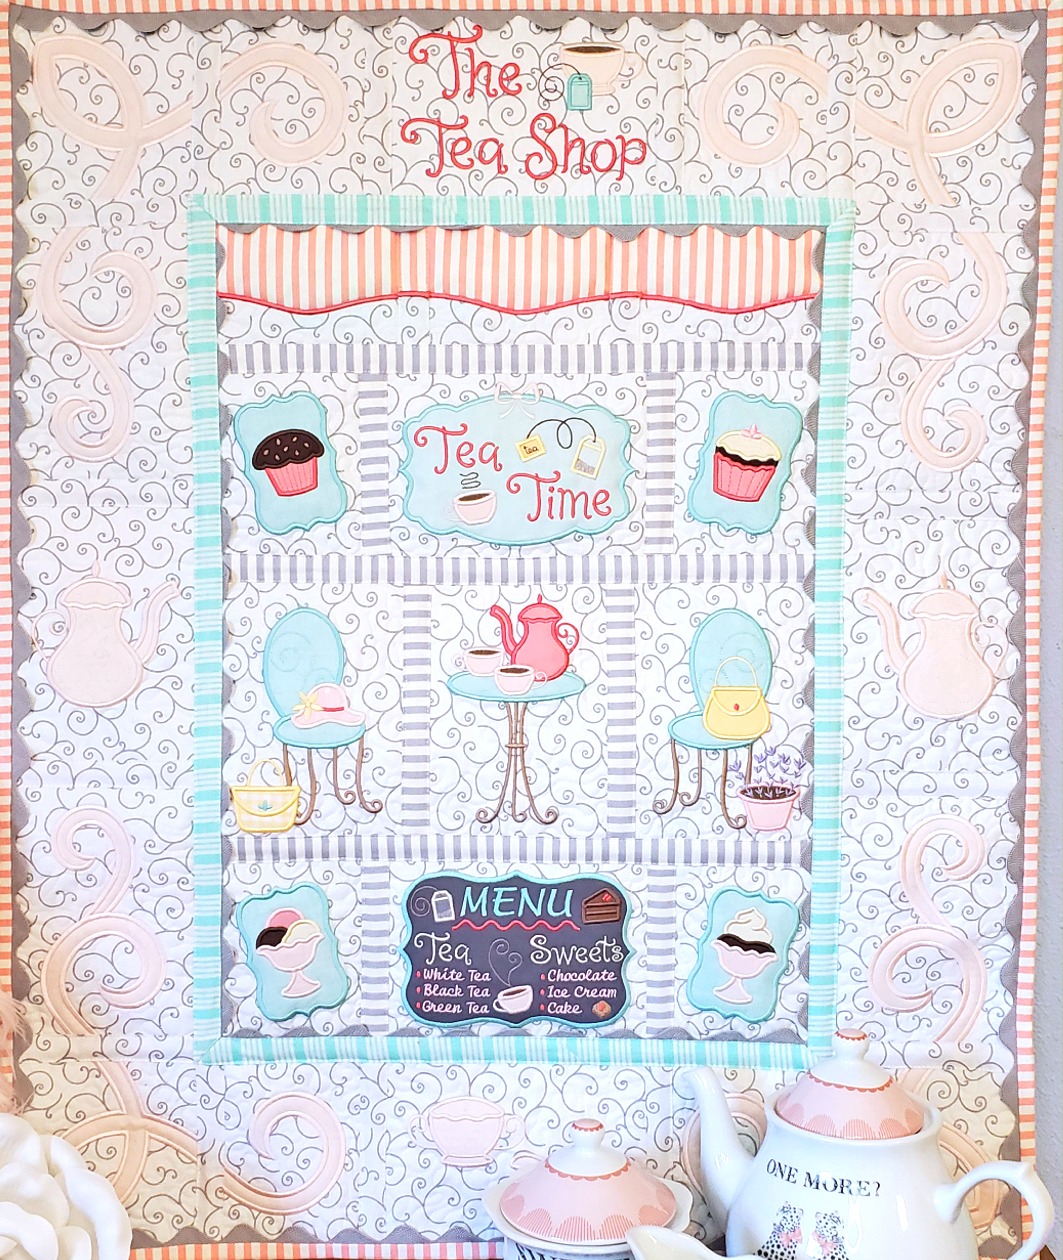 Tea Time Quilt by Shelly Smola